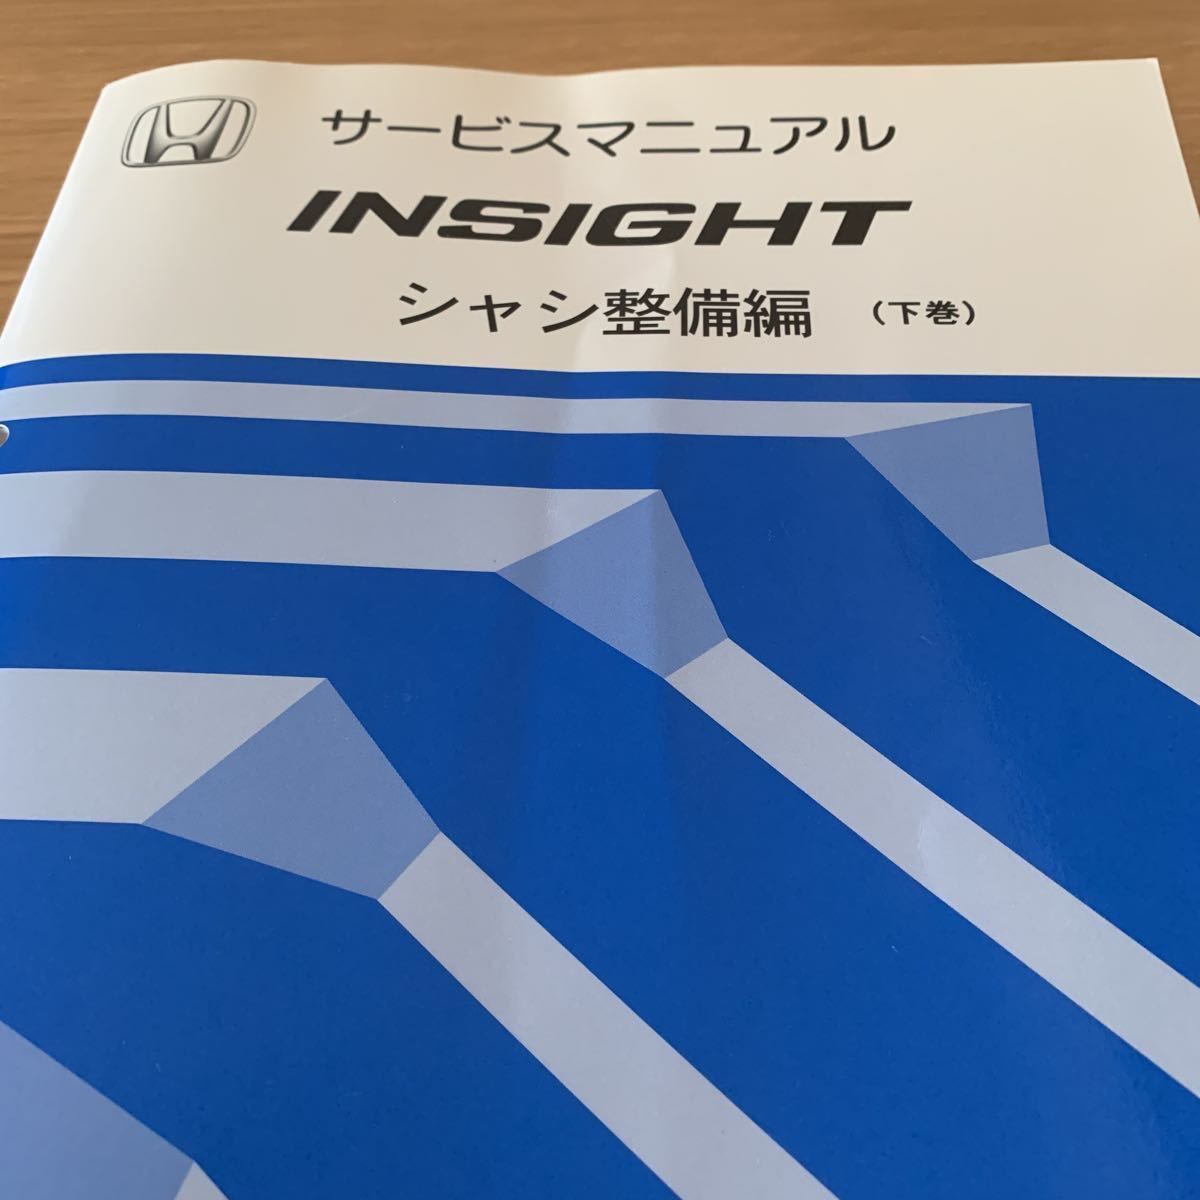  postage included * Insight service manual chassis maintenance compilation under volume /DAA-ZE2 type 1100001~/2009-2/ Honda Honda technical research institute industry HONDA INSIGHT circuit map 